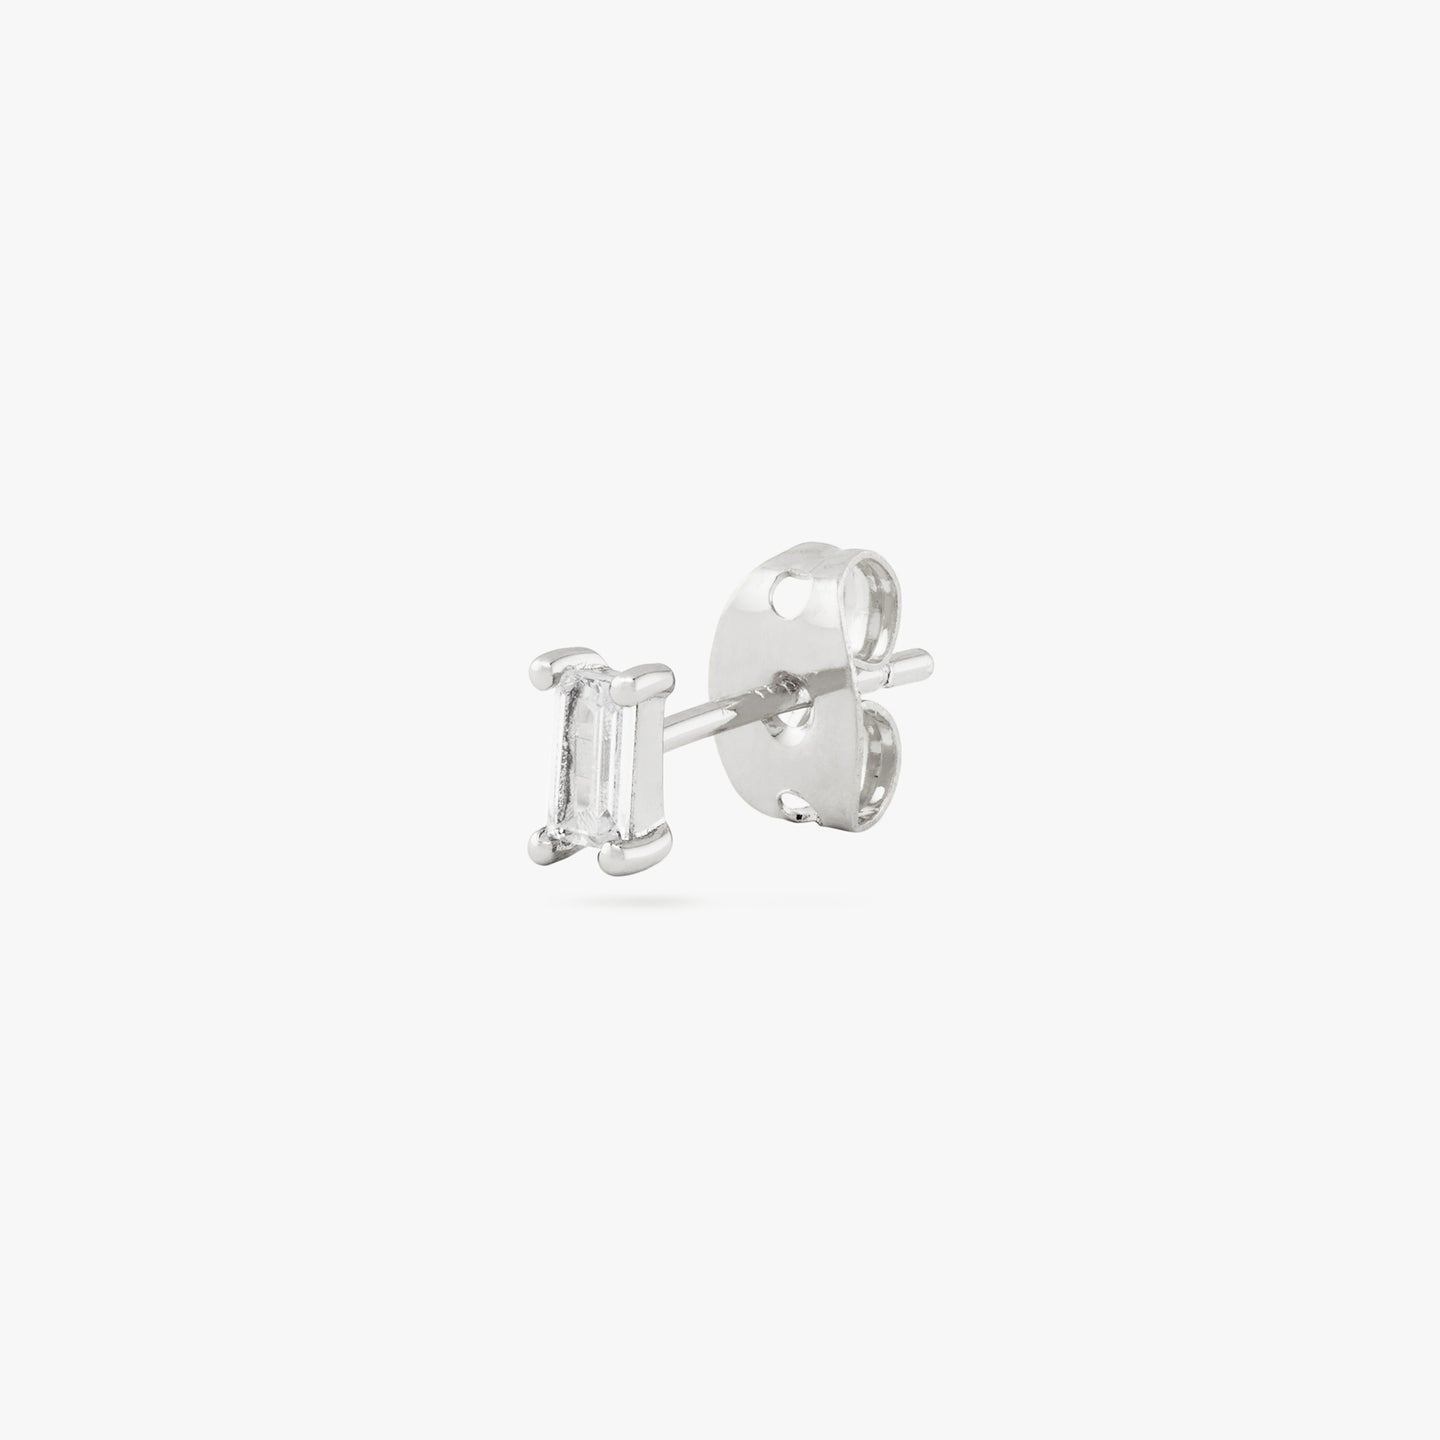 This is a silver baguette stud with a clear CZ gem color:null|silver/clear